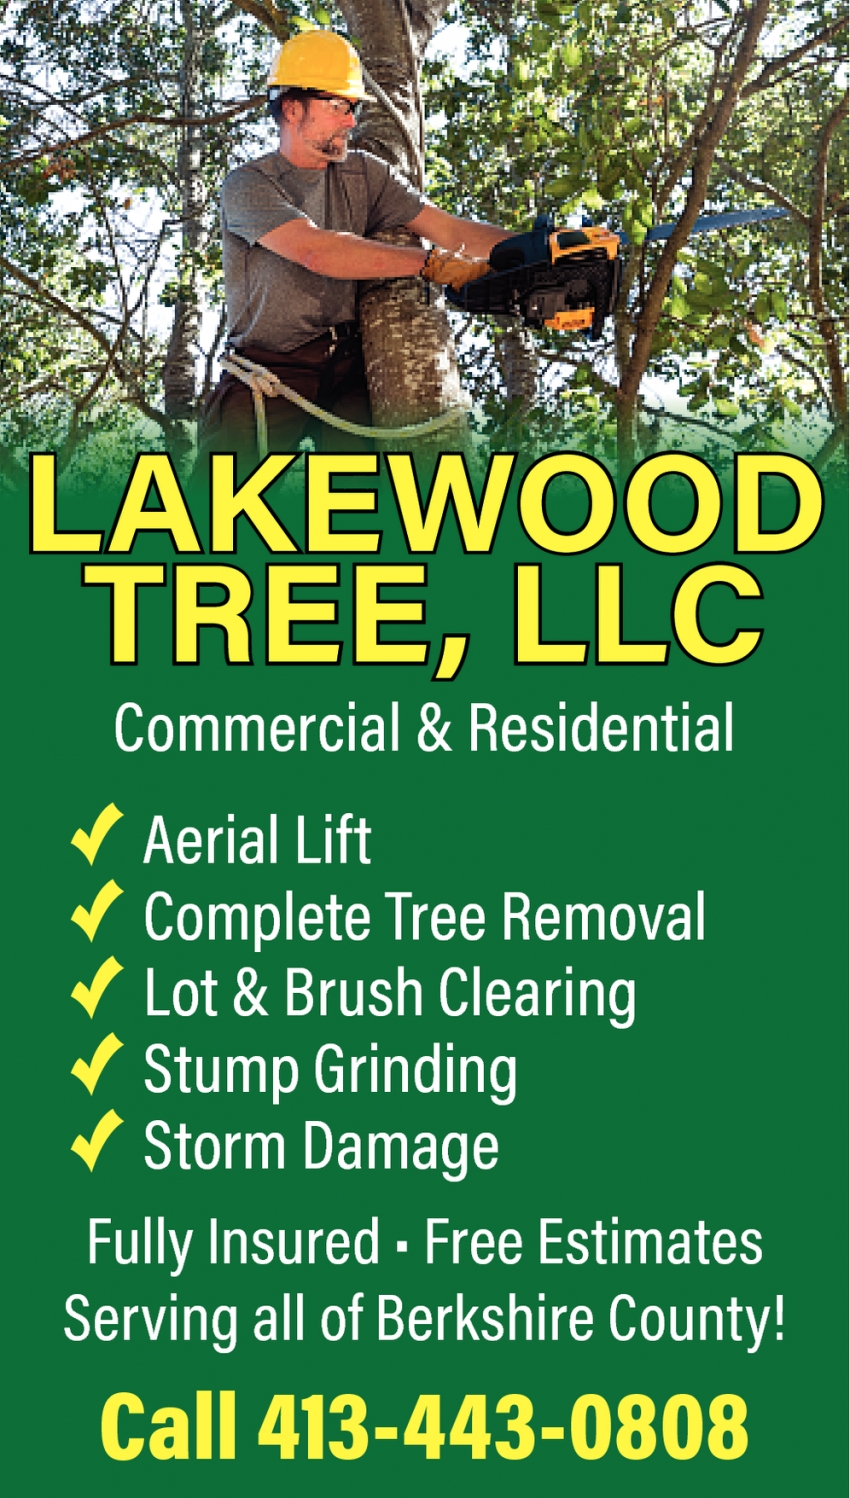 Complete Tree Removal